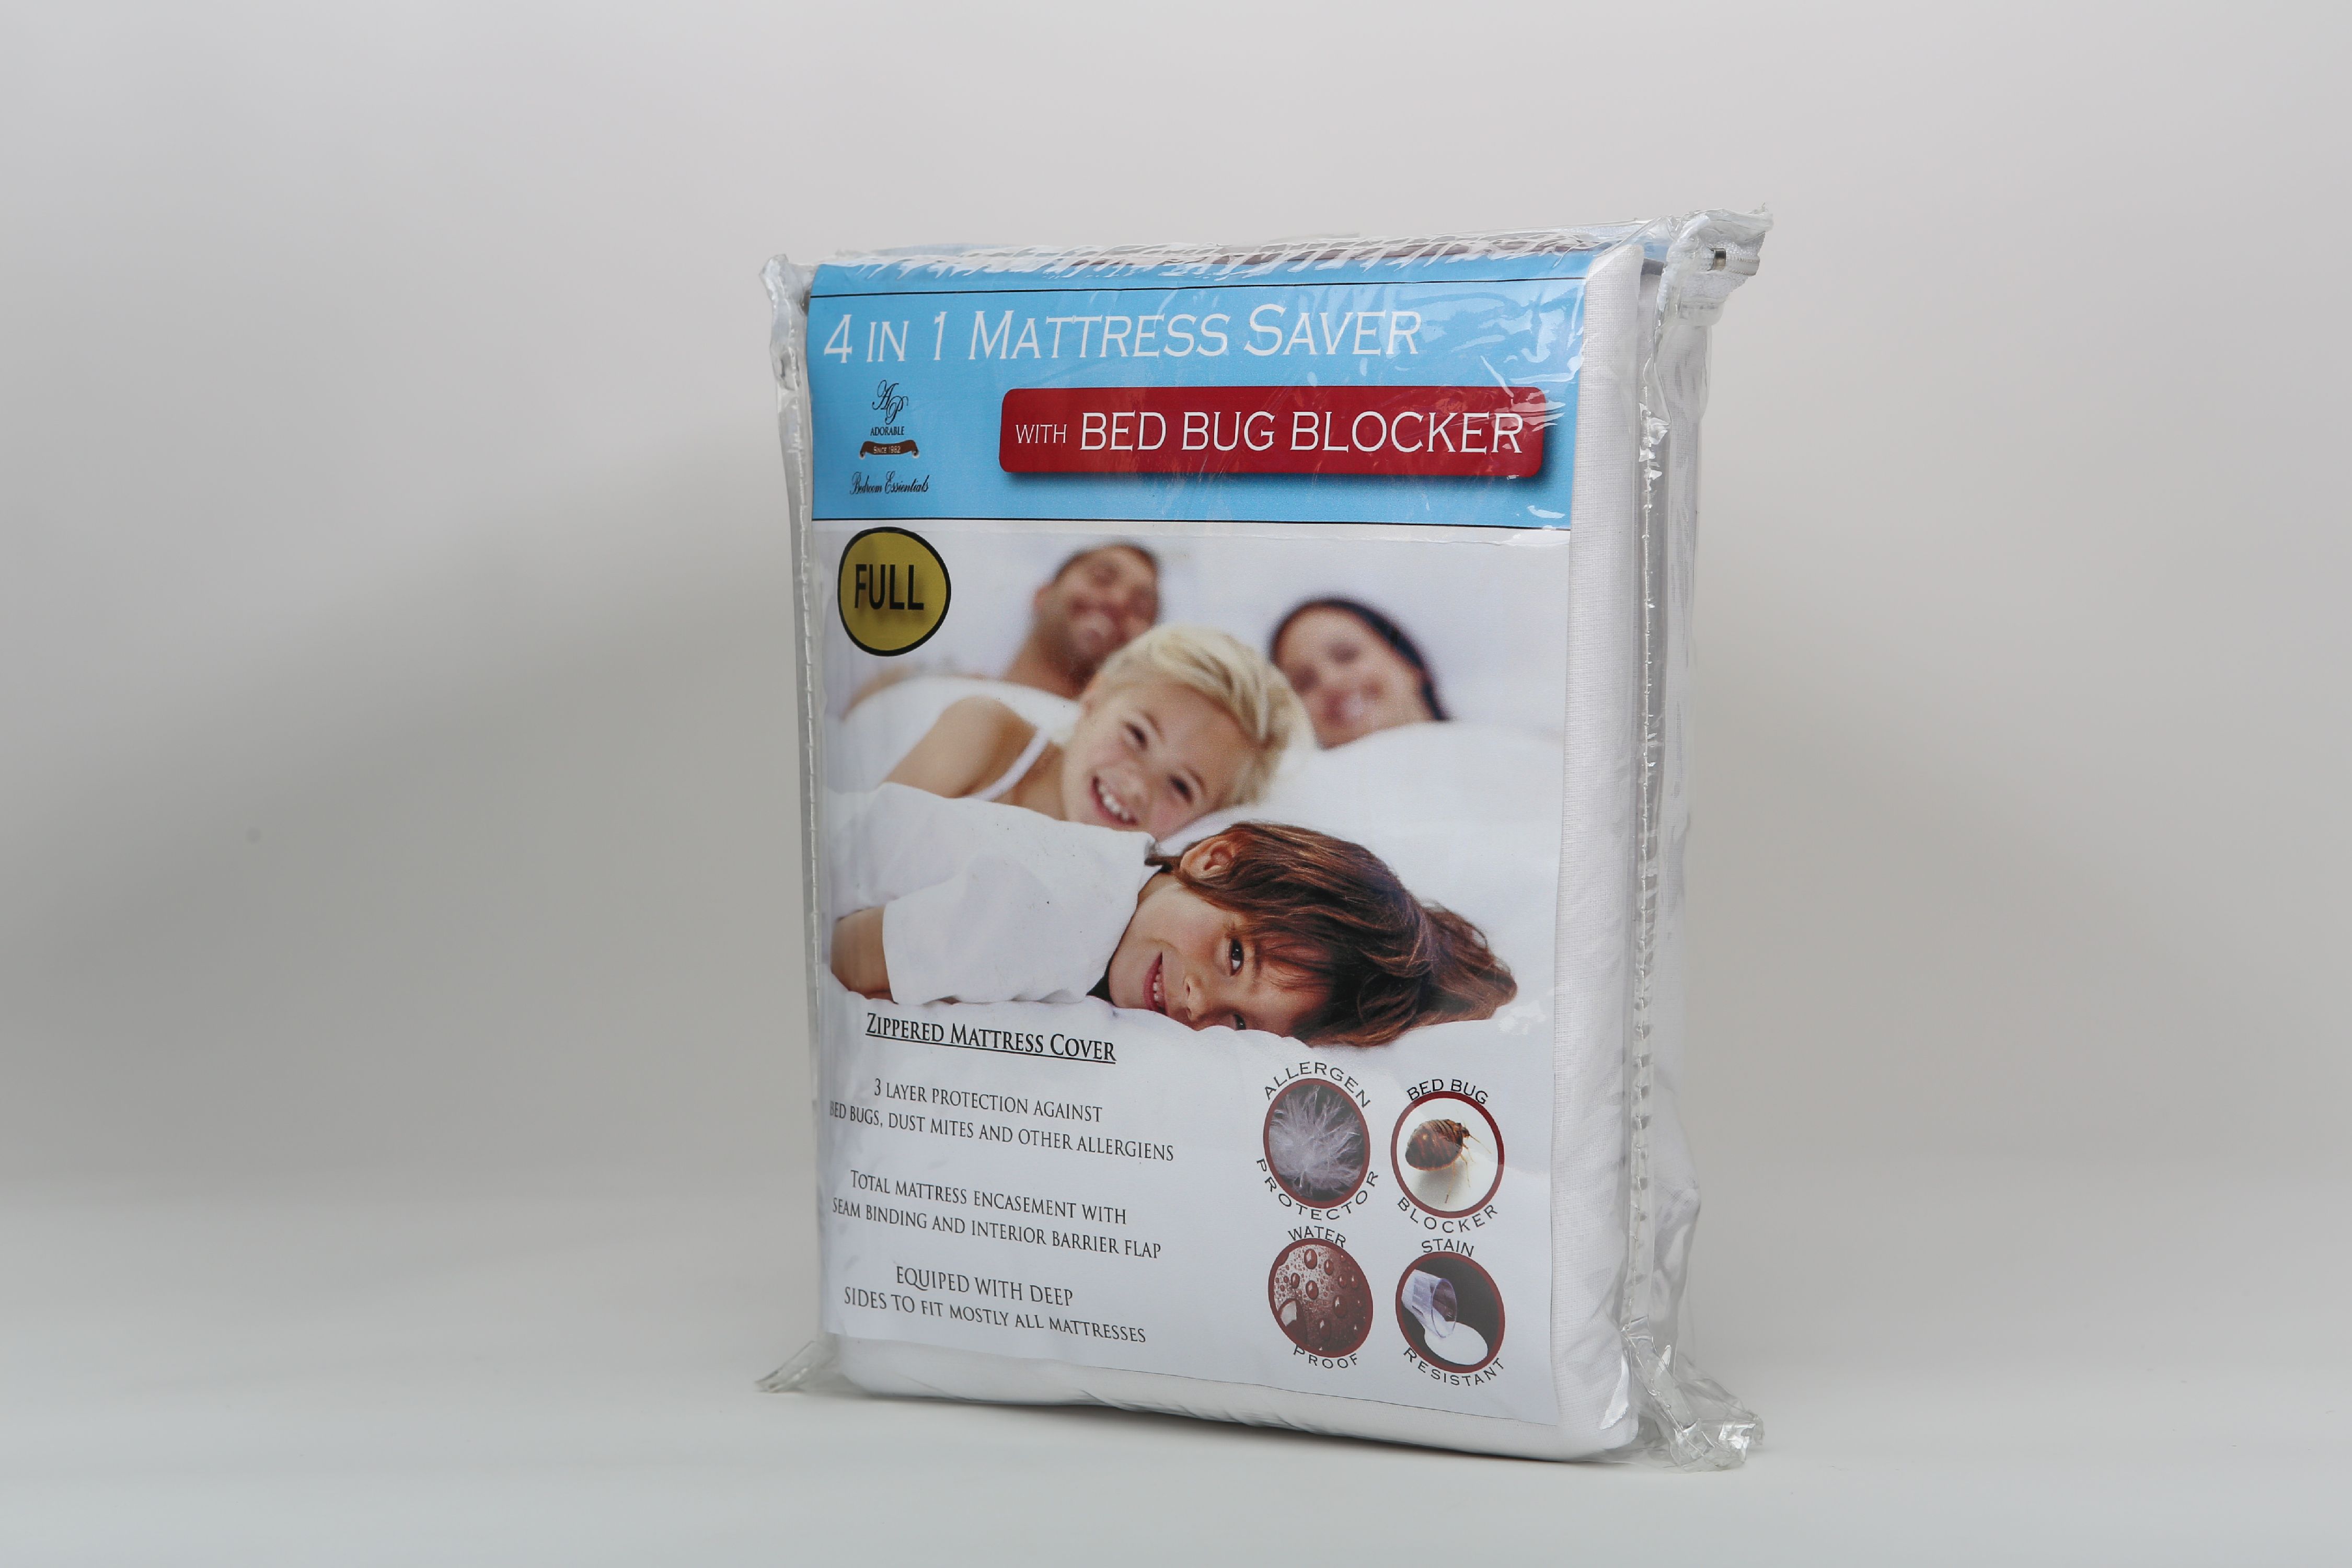 stain resistant mattress protector